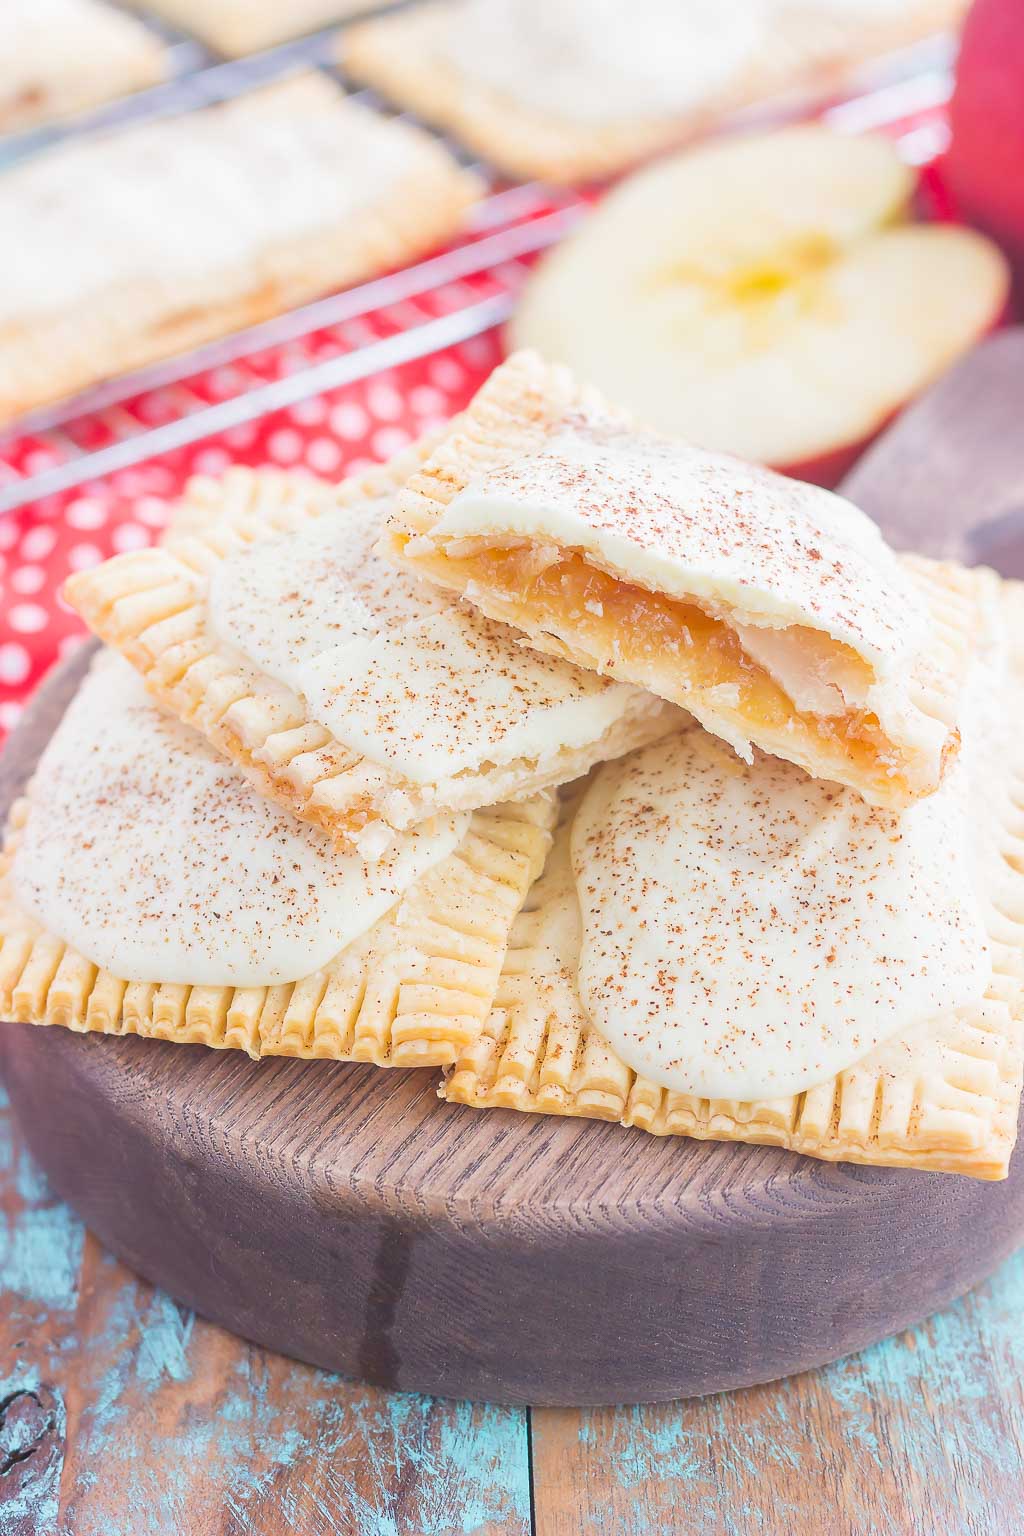 These Apple Pie Pop Tarts are an easy treat that's perfect for breakfast or dessert. Flaky pie crust surrounds sweet apple pie filling and is frosted with white chocolate and apple pie spice. Simple to make and better than the store-bought kind, you'll love the cozy taste of these homemade pop tarts!